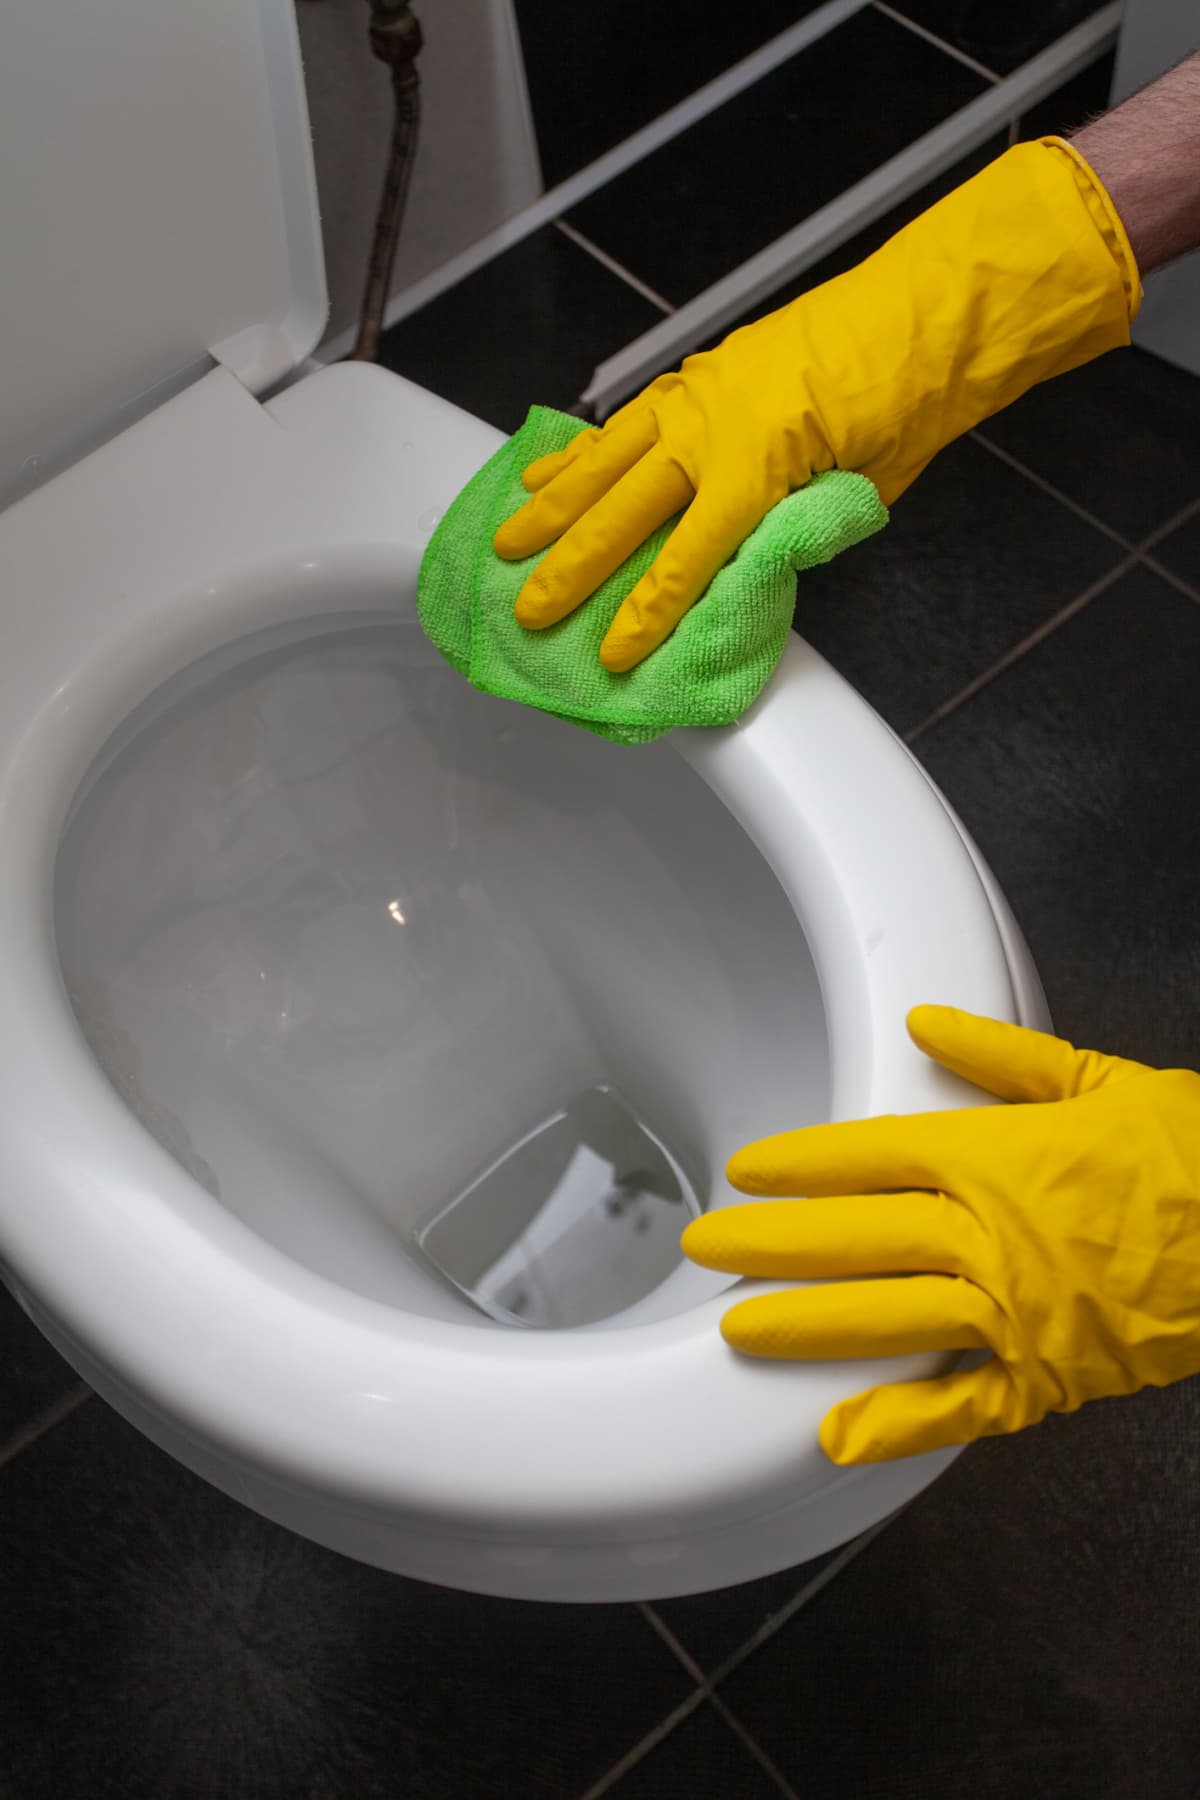 Hands of man in yellow gloves cleaning a toilet bowl.